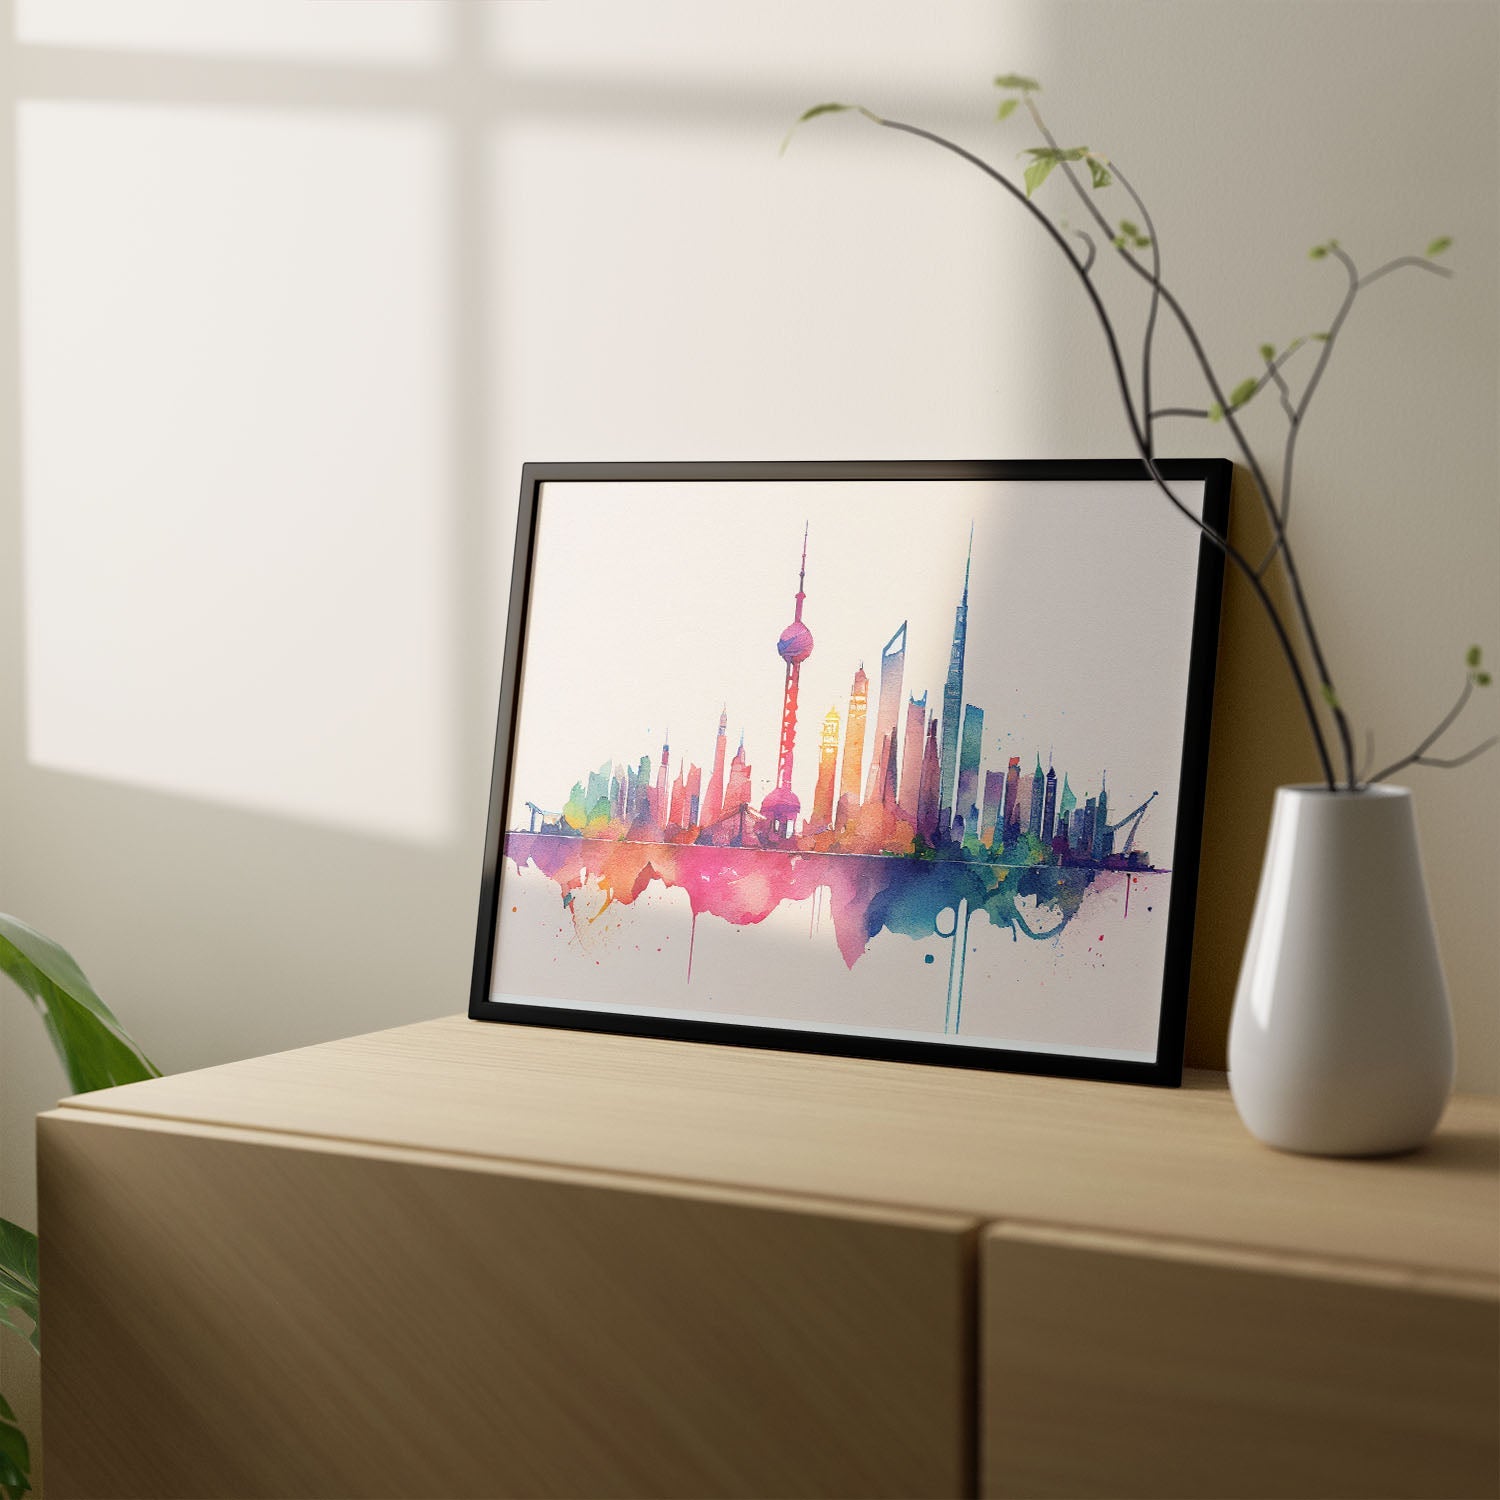 Nacnic watercolor of a skyline of the city of Shanghai_5. Aesthetic Wall Art Prints for Bedroom or Living Room Design.-Artwork-Nacnic-A4-Sin Marco-Nacnic Estudio SL